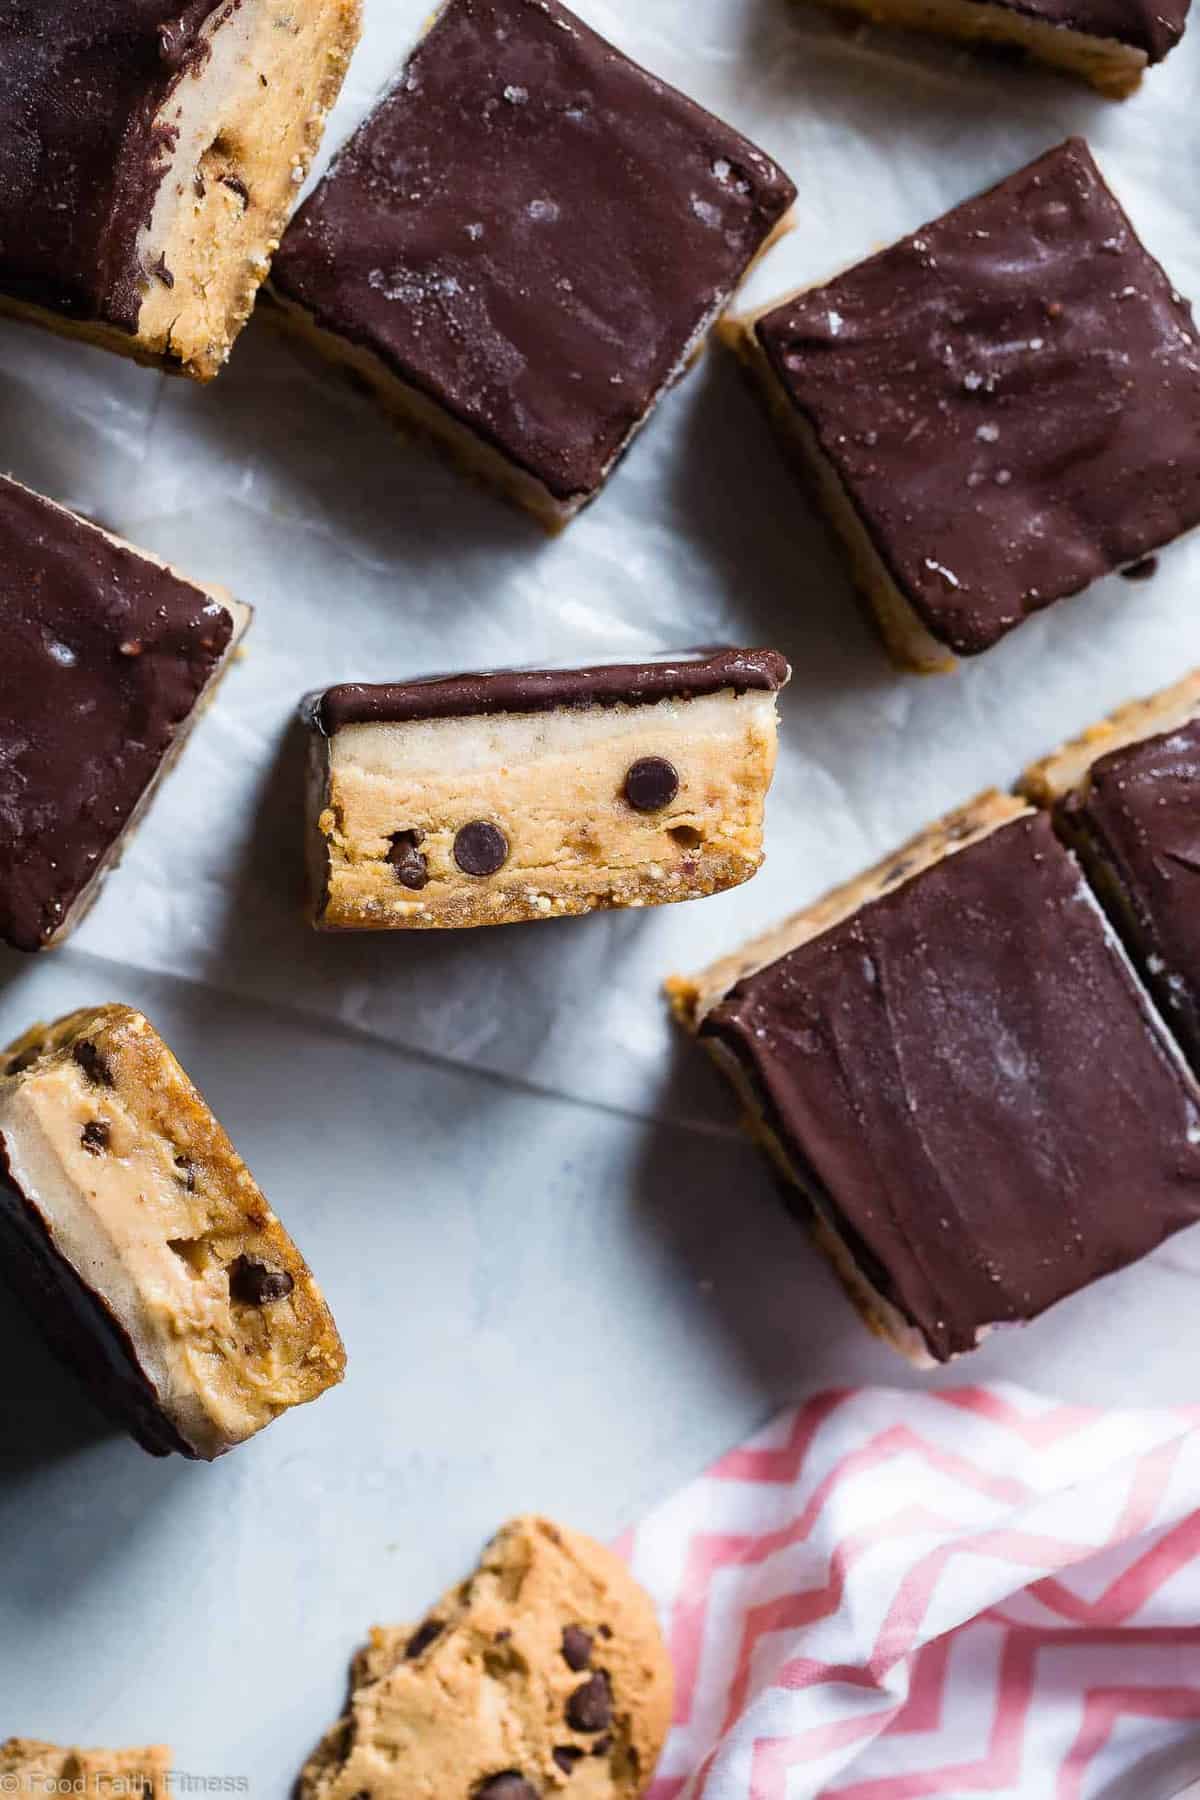 Dairy Free Cookie Dough Banana Ice Cream Bars - Love cookie dough? Then you NEED these Banana Ice Cream Bars! A healthy, vegan friendly and gluten and dairy free no bake Summer treat that is SO easy! Kids and adults will LOVE them! | #Foodfaithfitness | #Glutenfree #Vegan #Healthy #Dairyfree #Nicecream